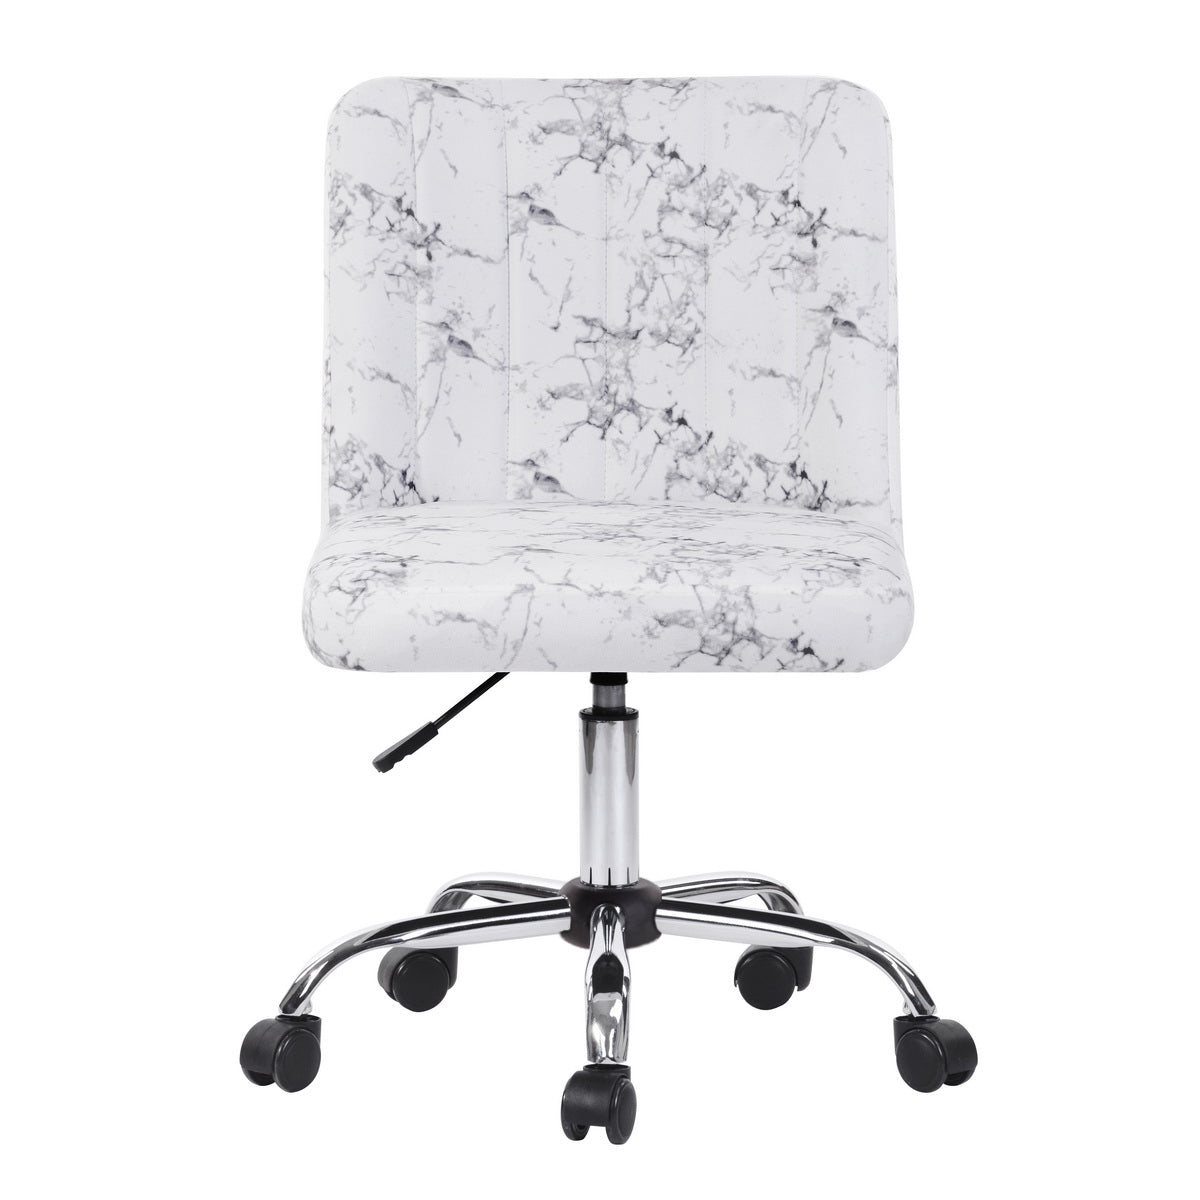 Home office task chair Fabric Printing